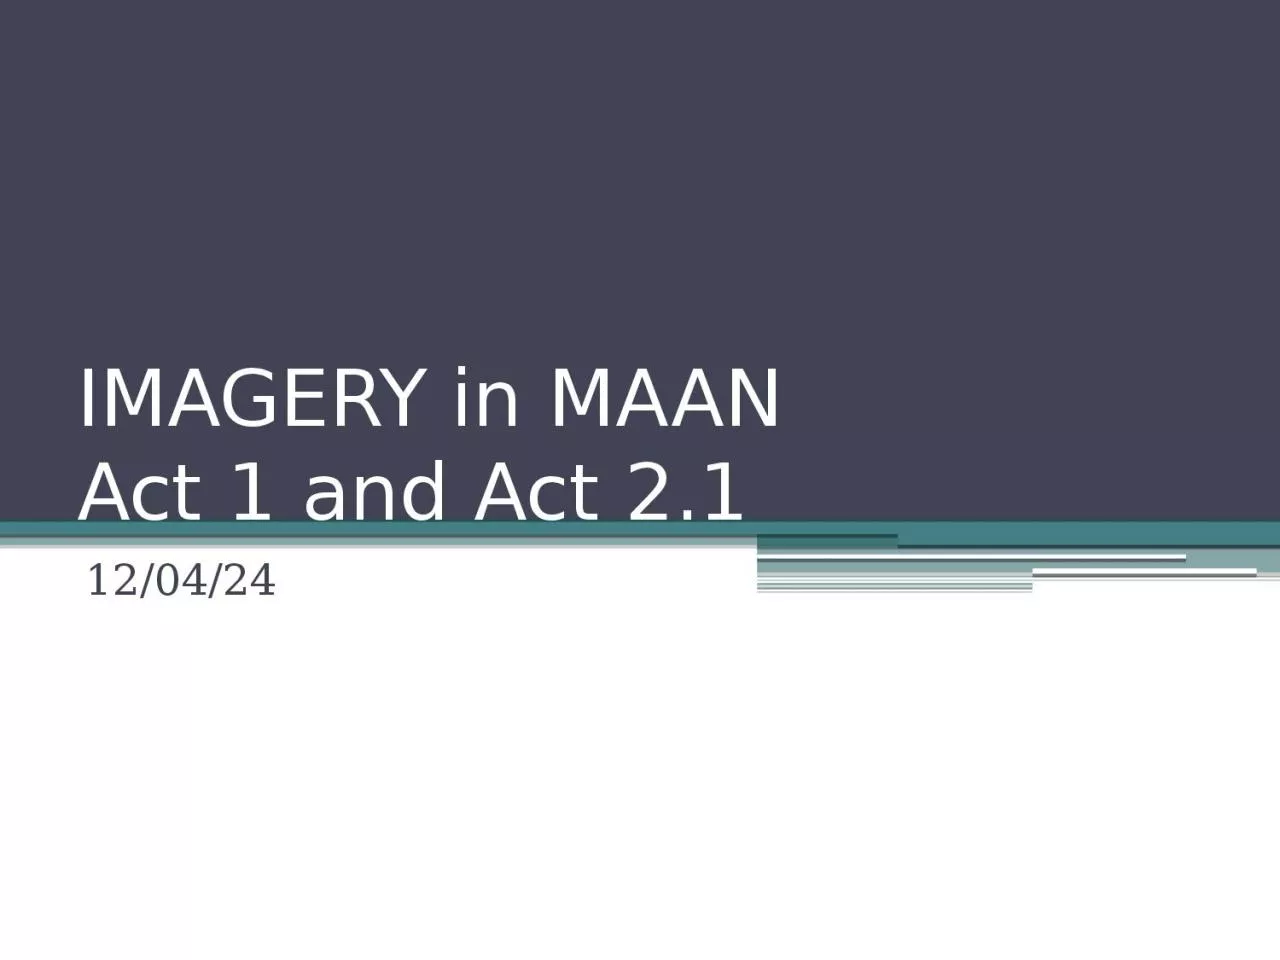 IMAGERY in MAAN Act 1 and Act 2.1